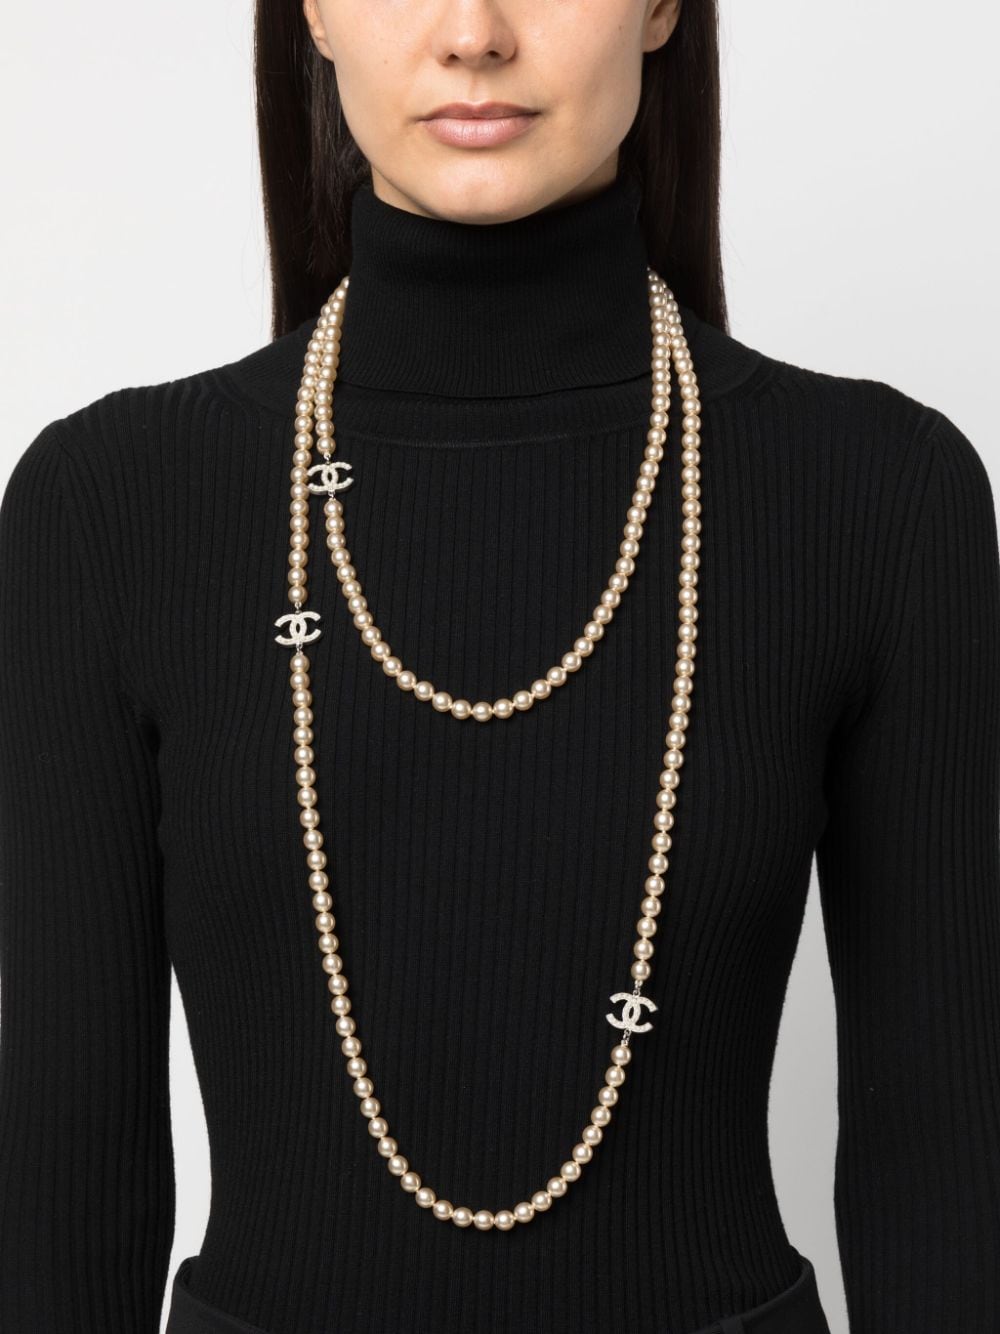 CHANEL Pre-Owned 2006 CC Pearl Necklace - Farfetch